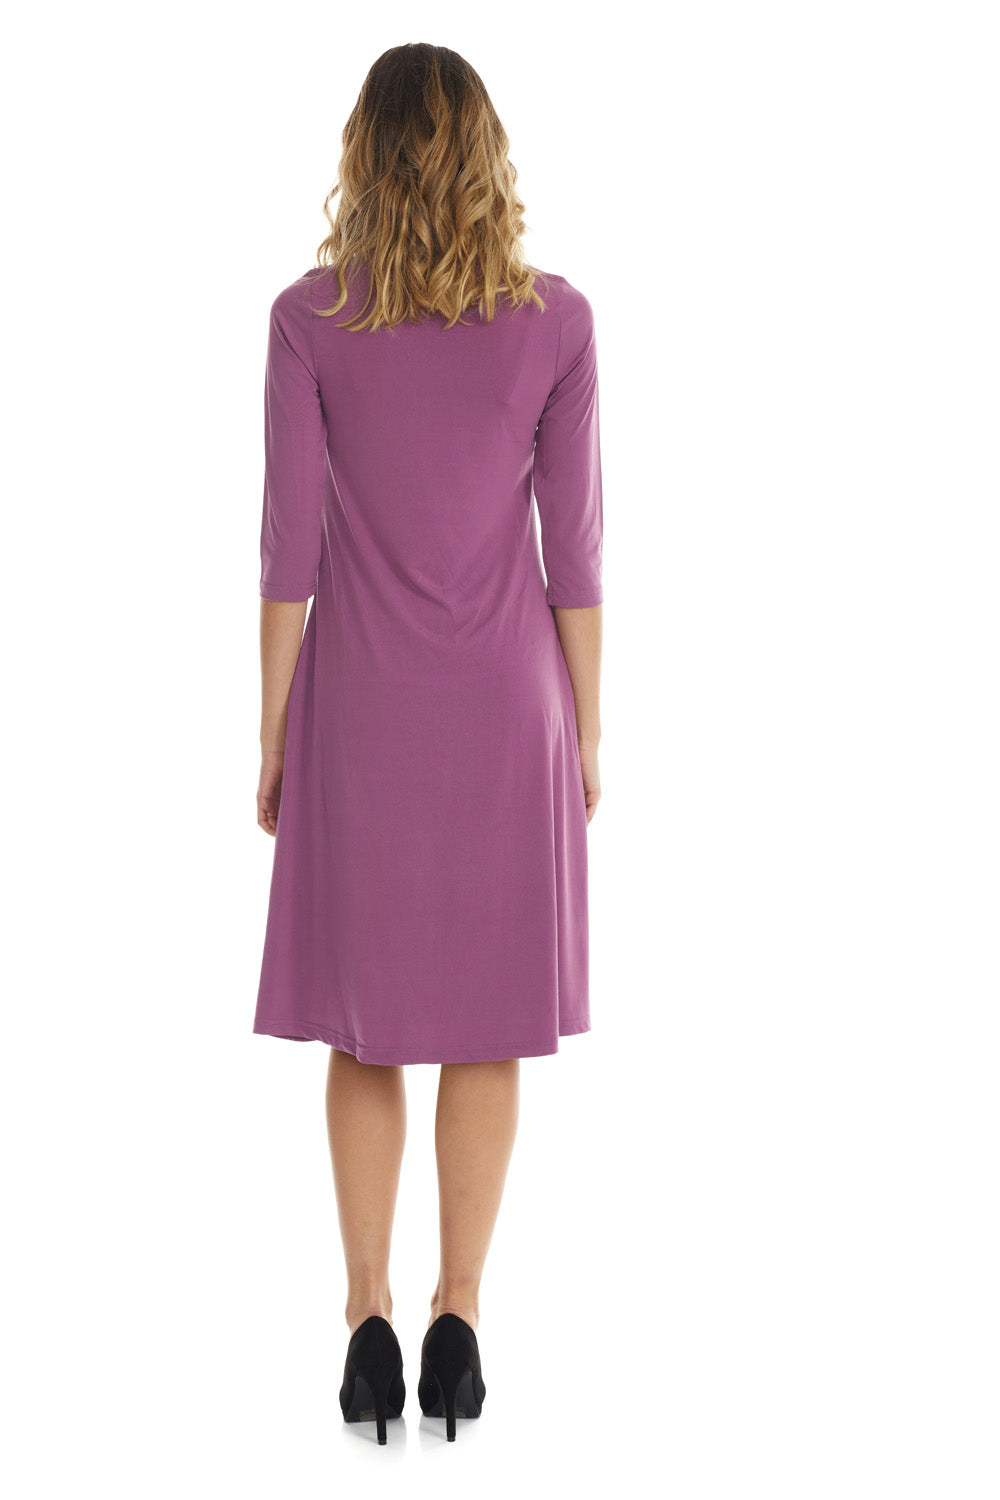 mauve flary below knee length 3/4 sleeve crew neck modest tznius a-line dress with pockets big enough for smartphone